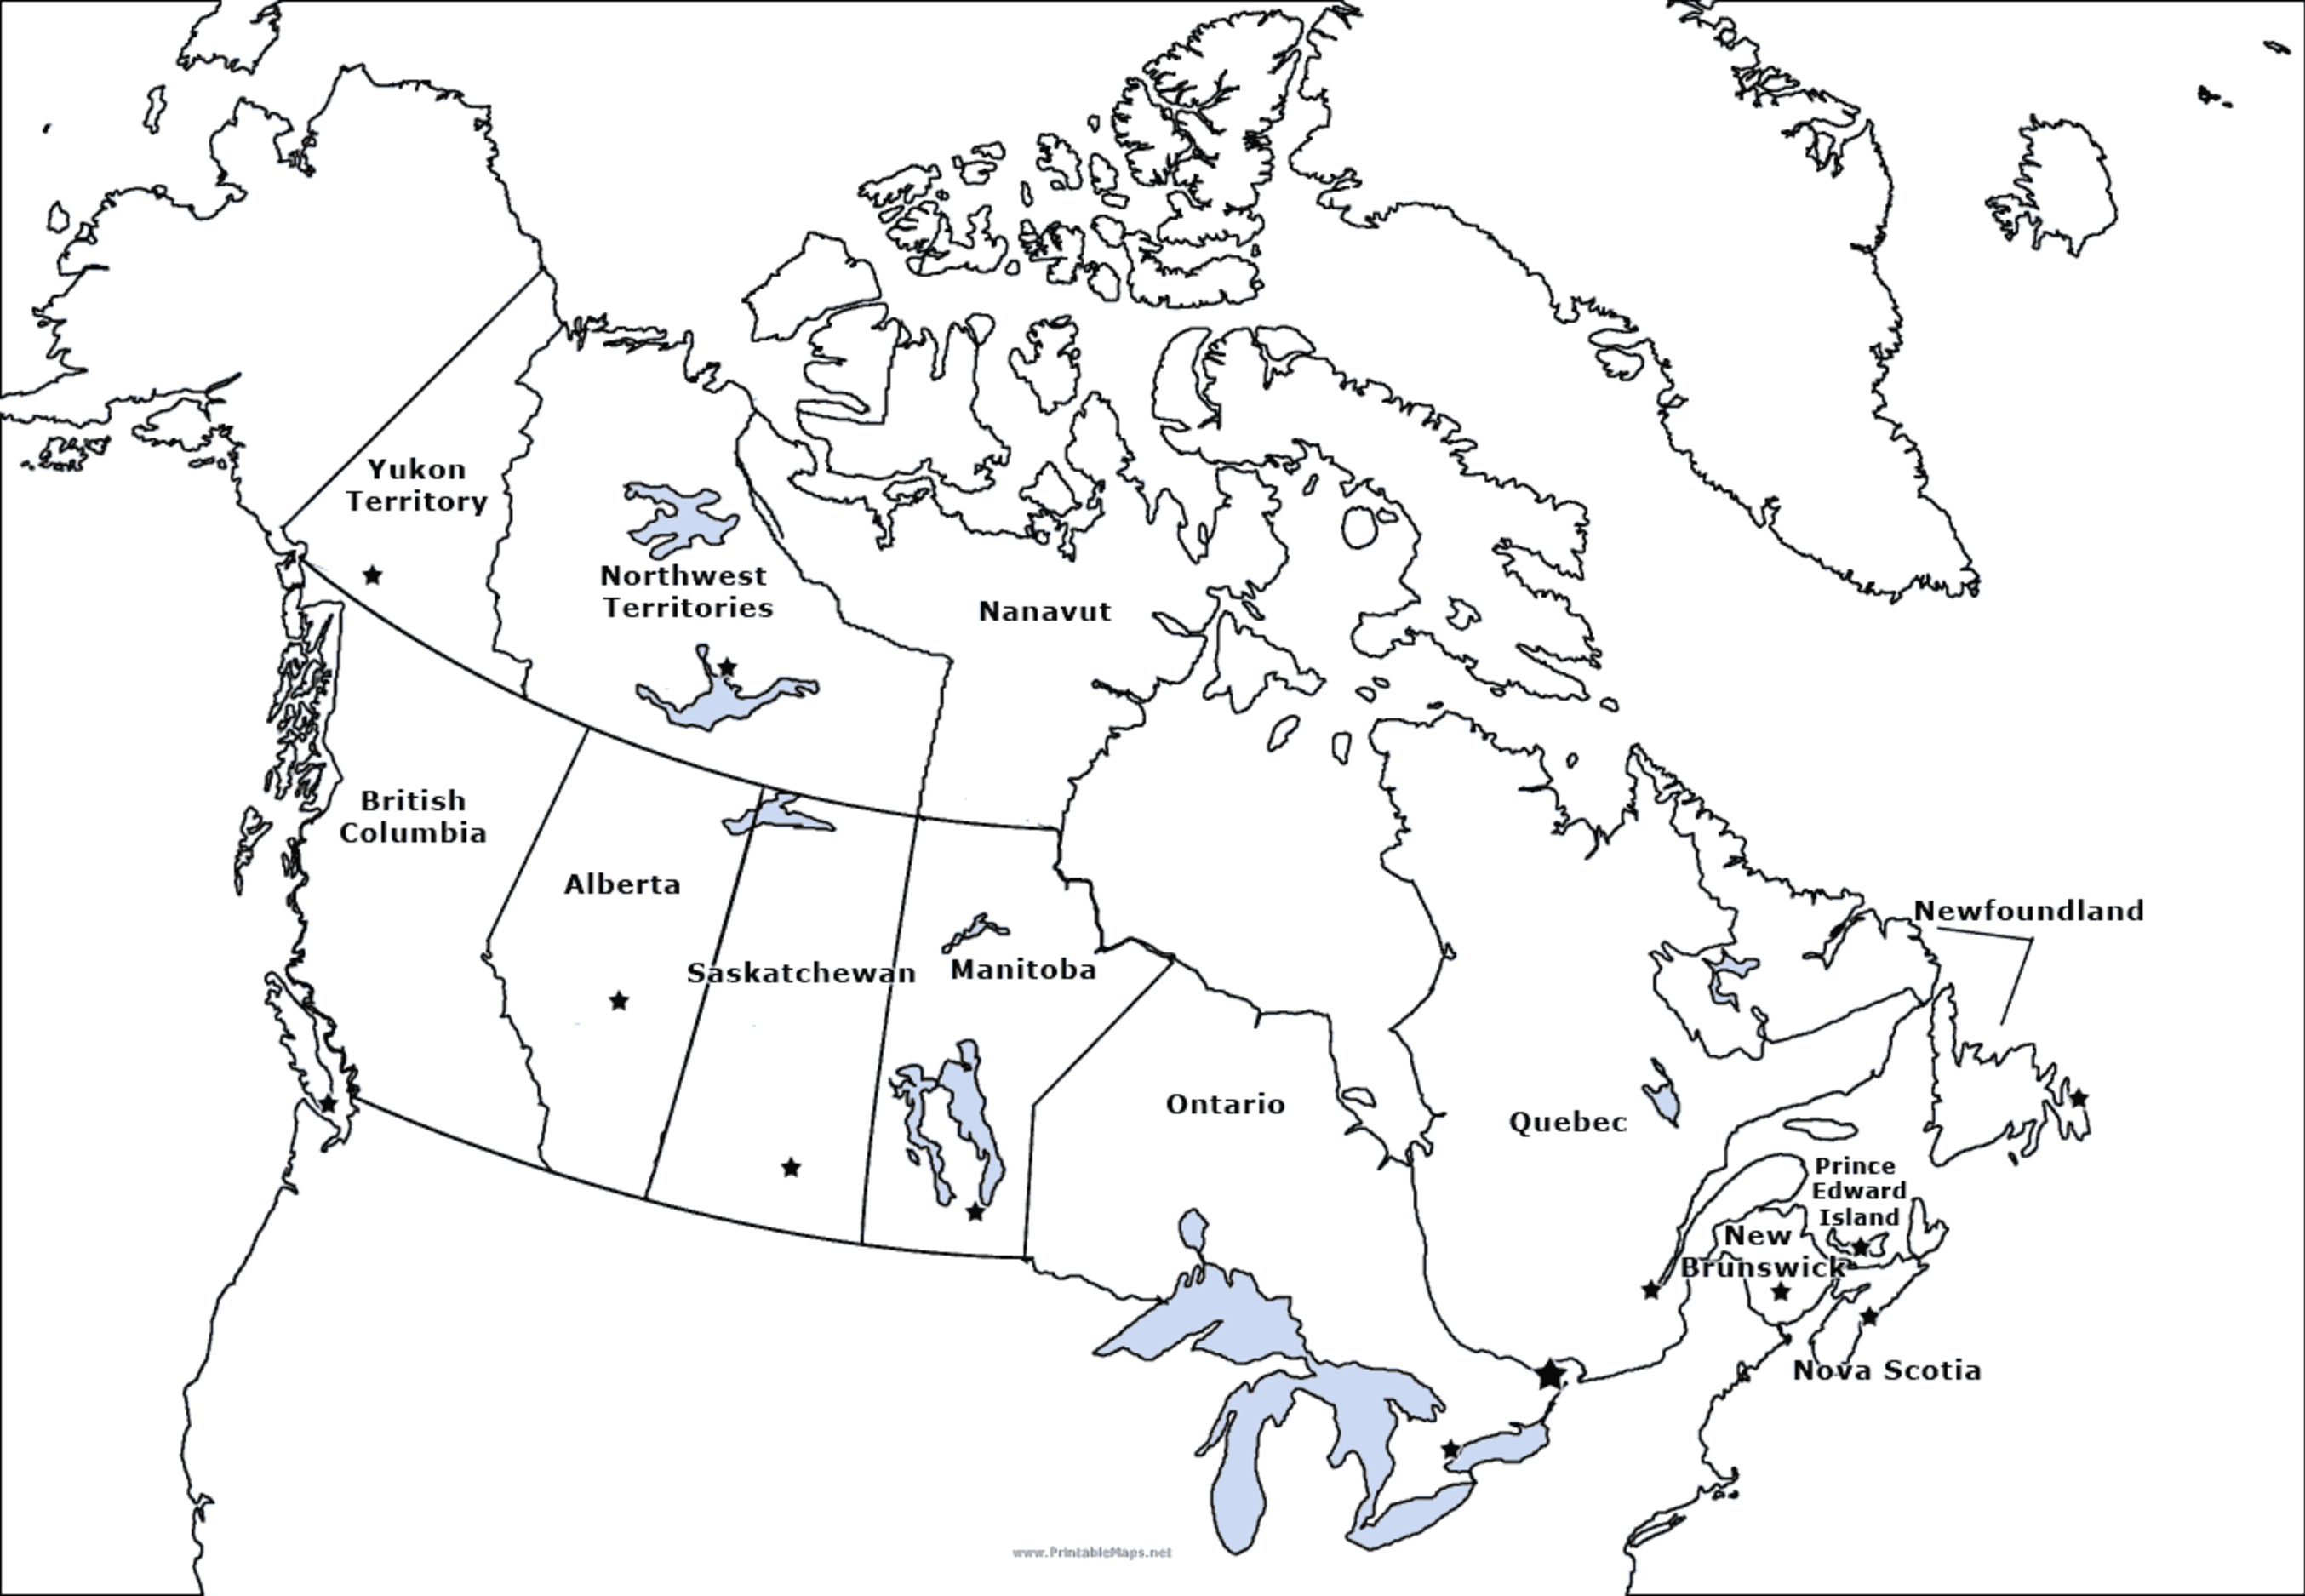 Map Of Provinces Capitals In Canada Canada Provinces Canadian - Free Printable Map Of Canada Provinces And Territories